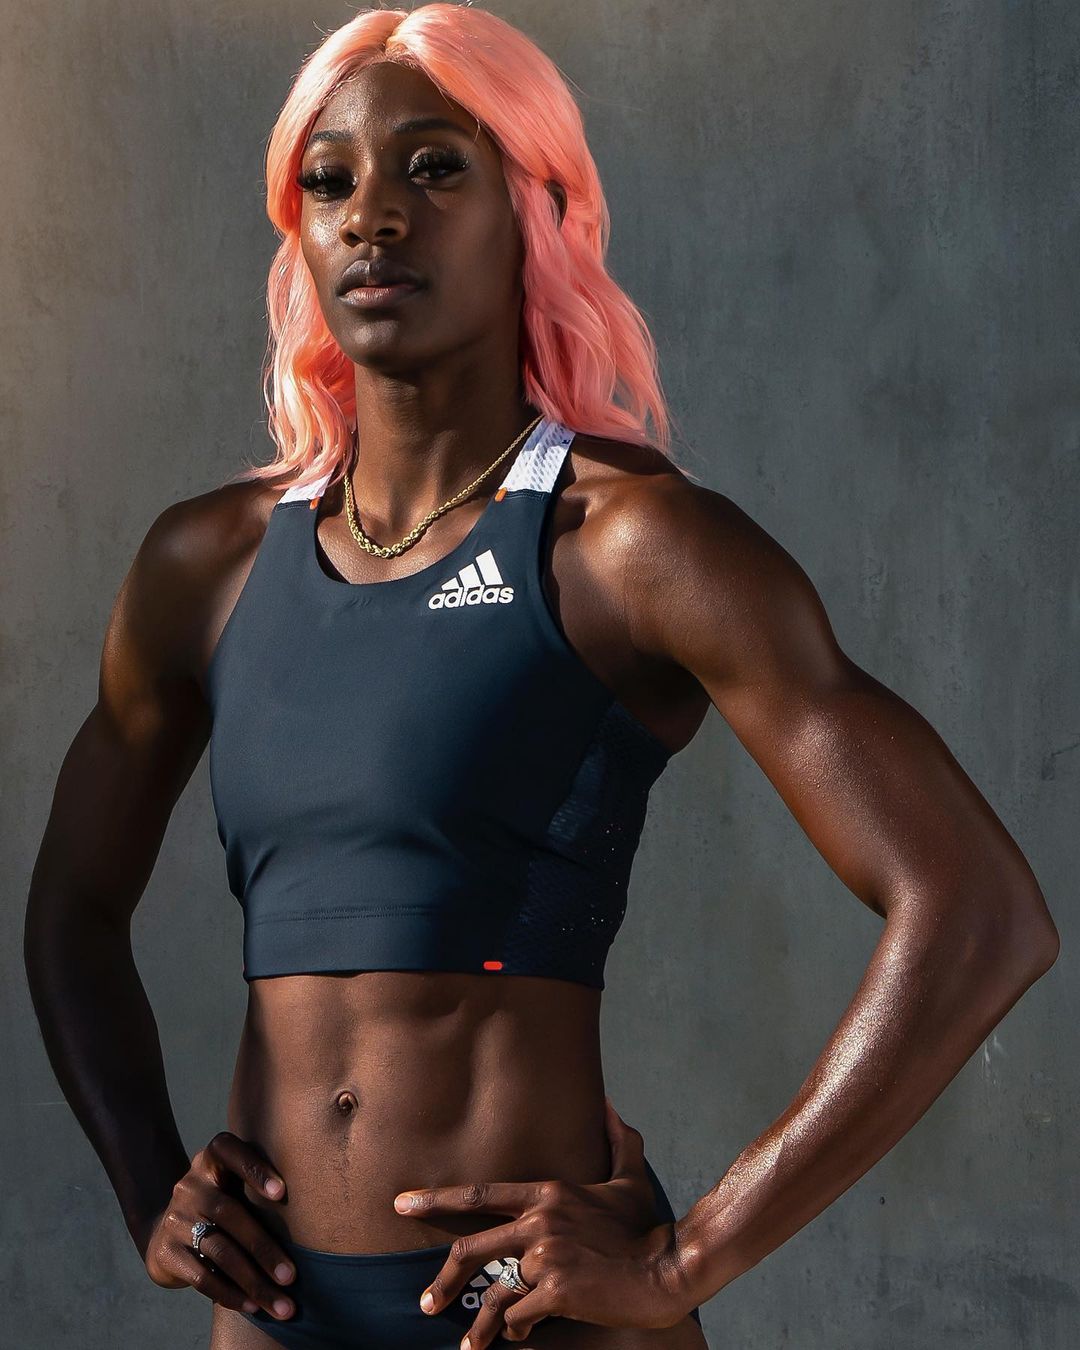 Shaunae Miller-Uibo: 400 m Olympic Champion & one of the ...